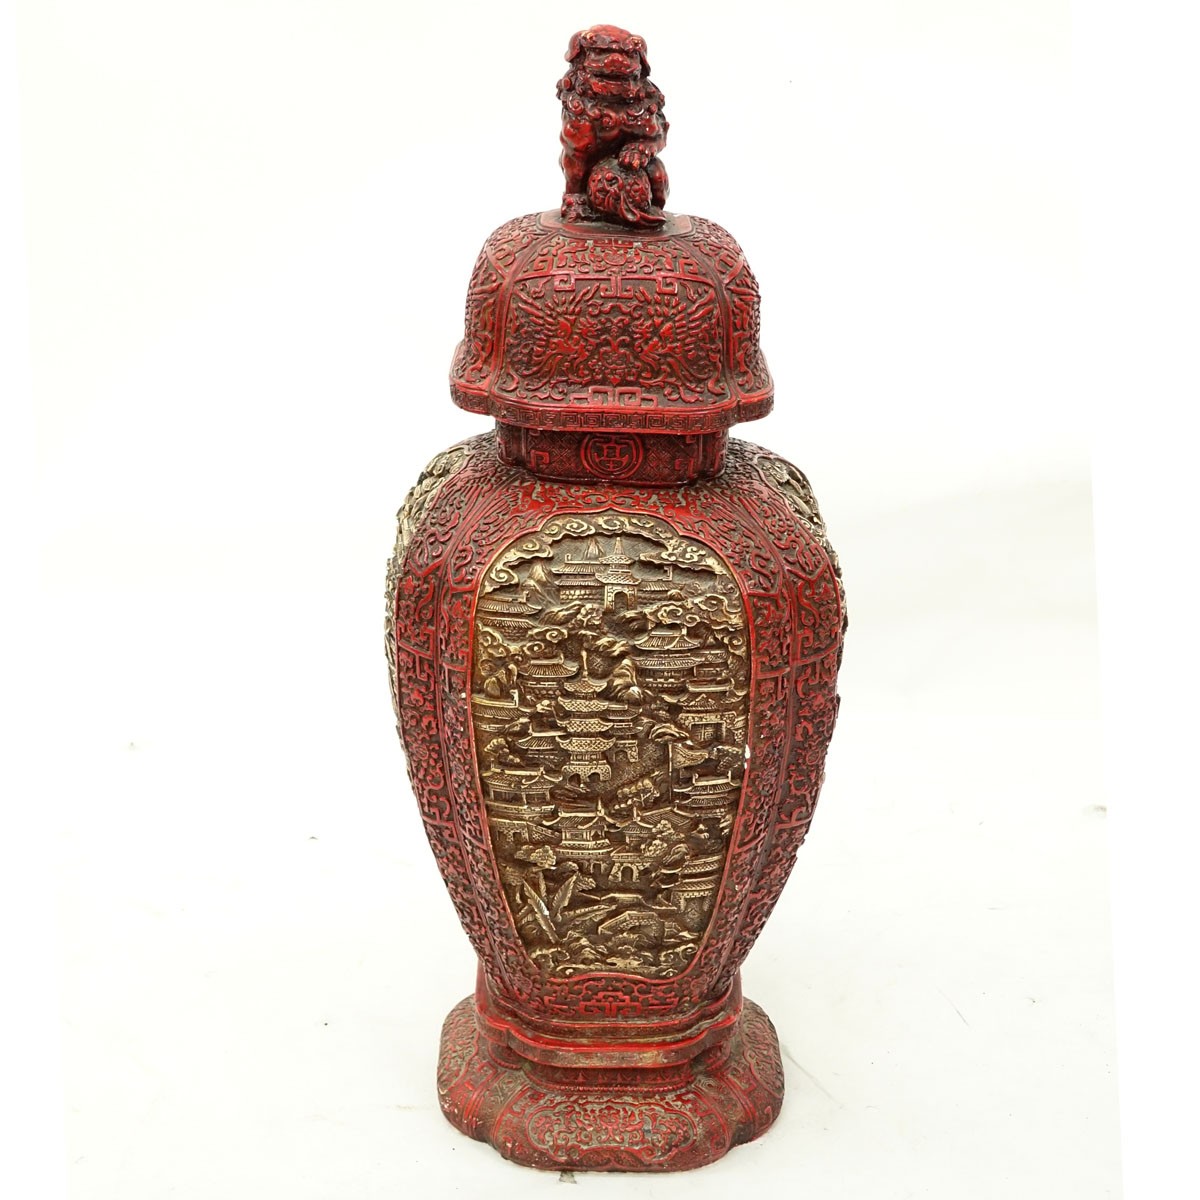 Large Chinese Cinnabar Style Raised Relief Plaster, In the Form of a Covered Urn. A few nicks to surface otherwise good condition.